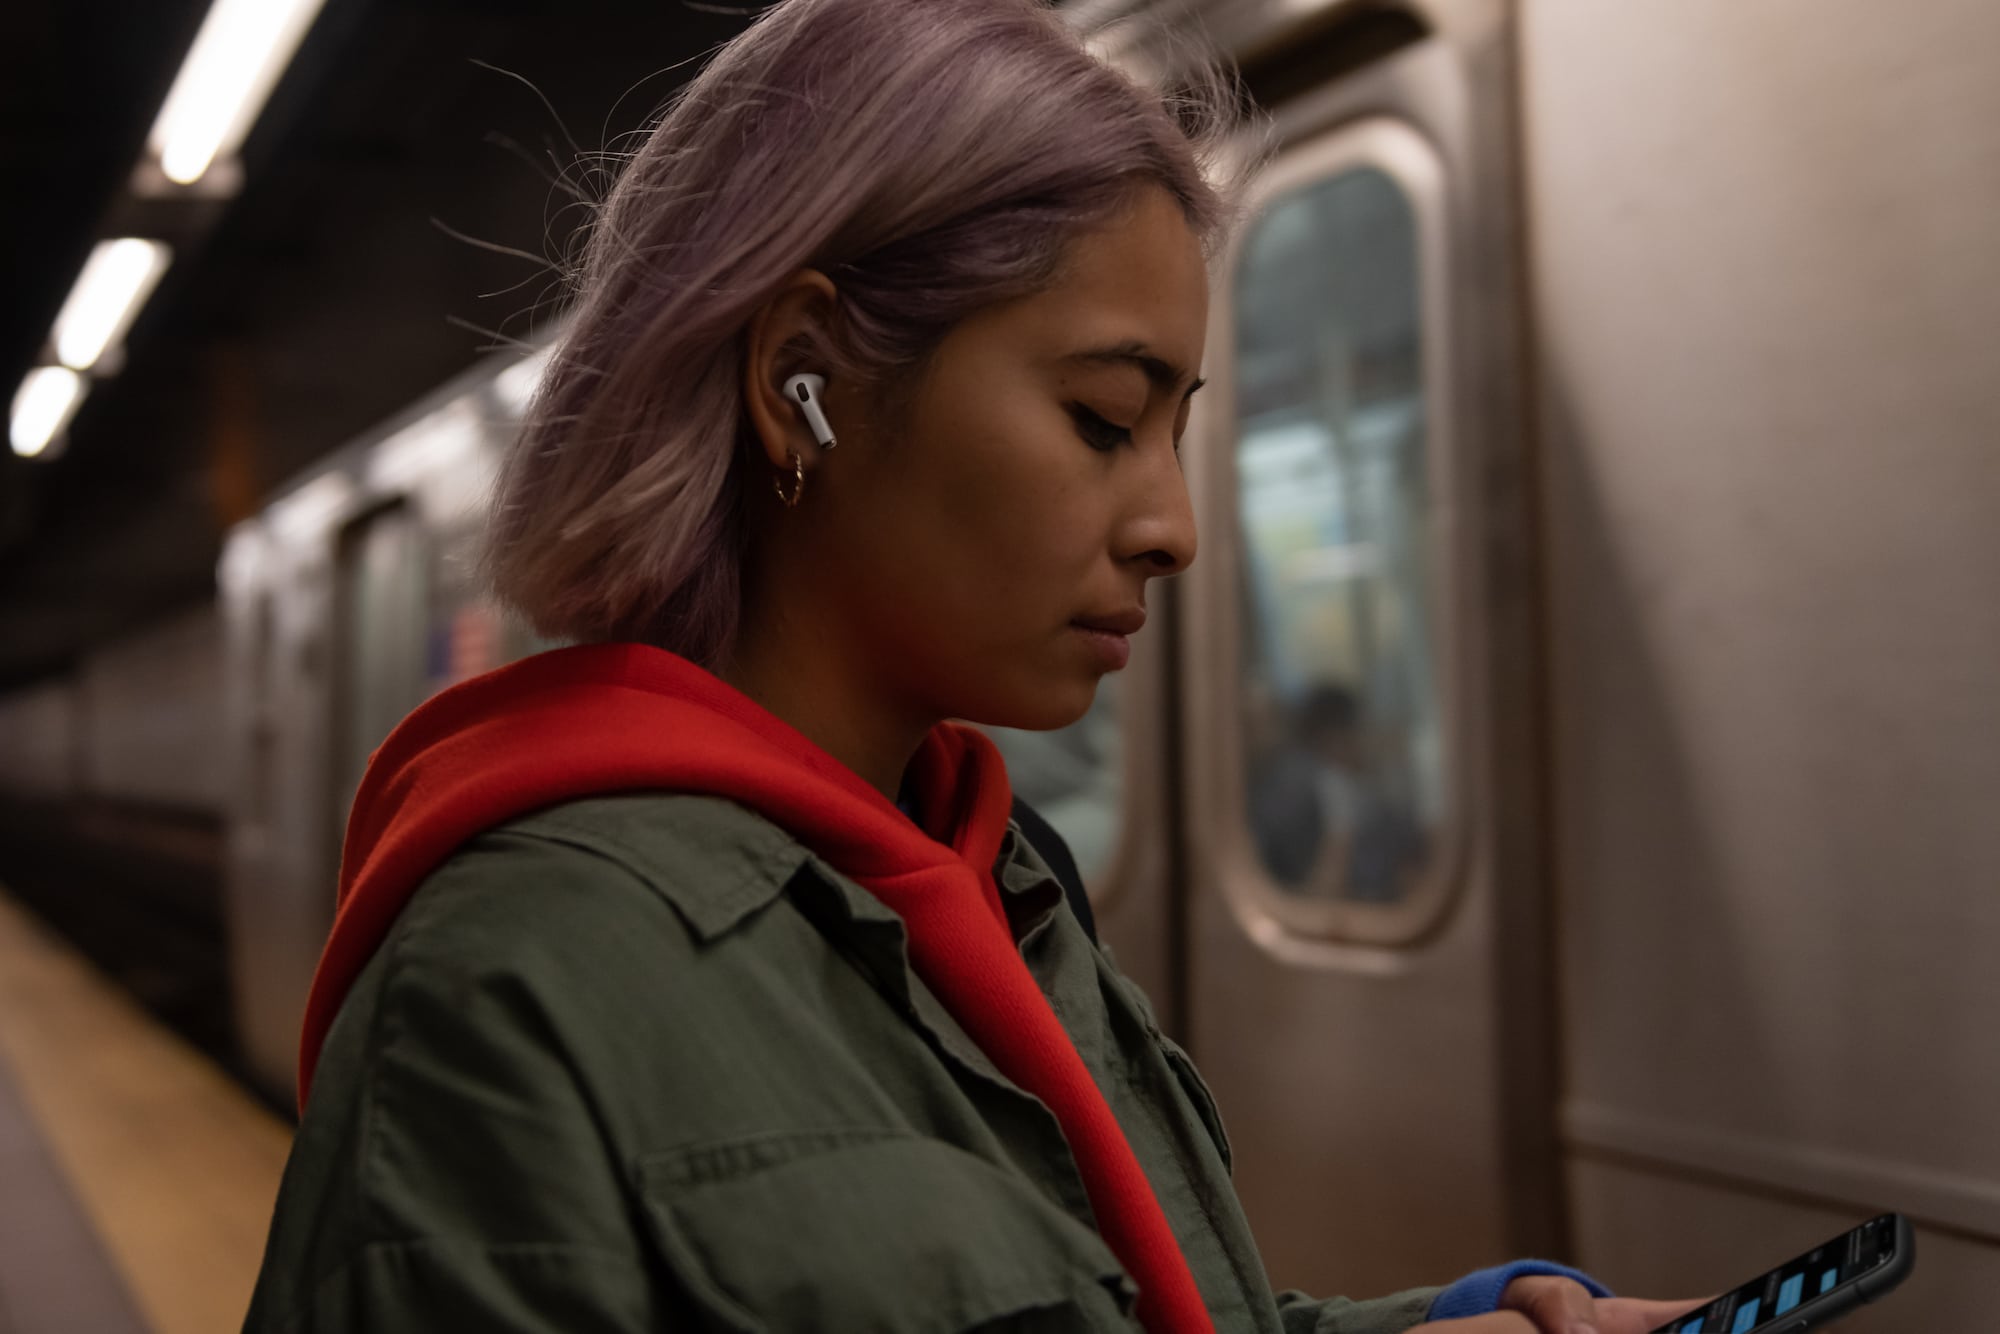 The new AirPods Pro design looks better (and promises increased comfort).